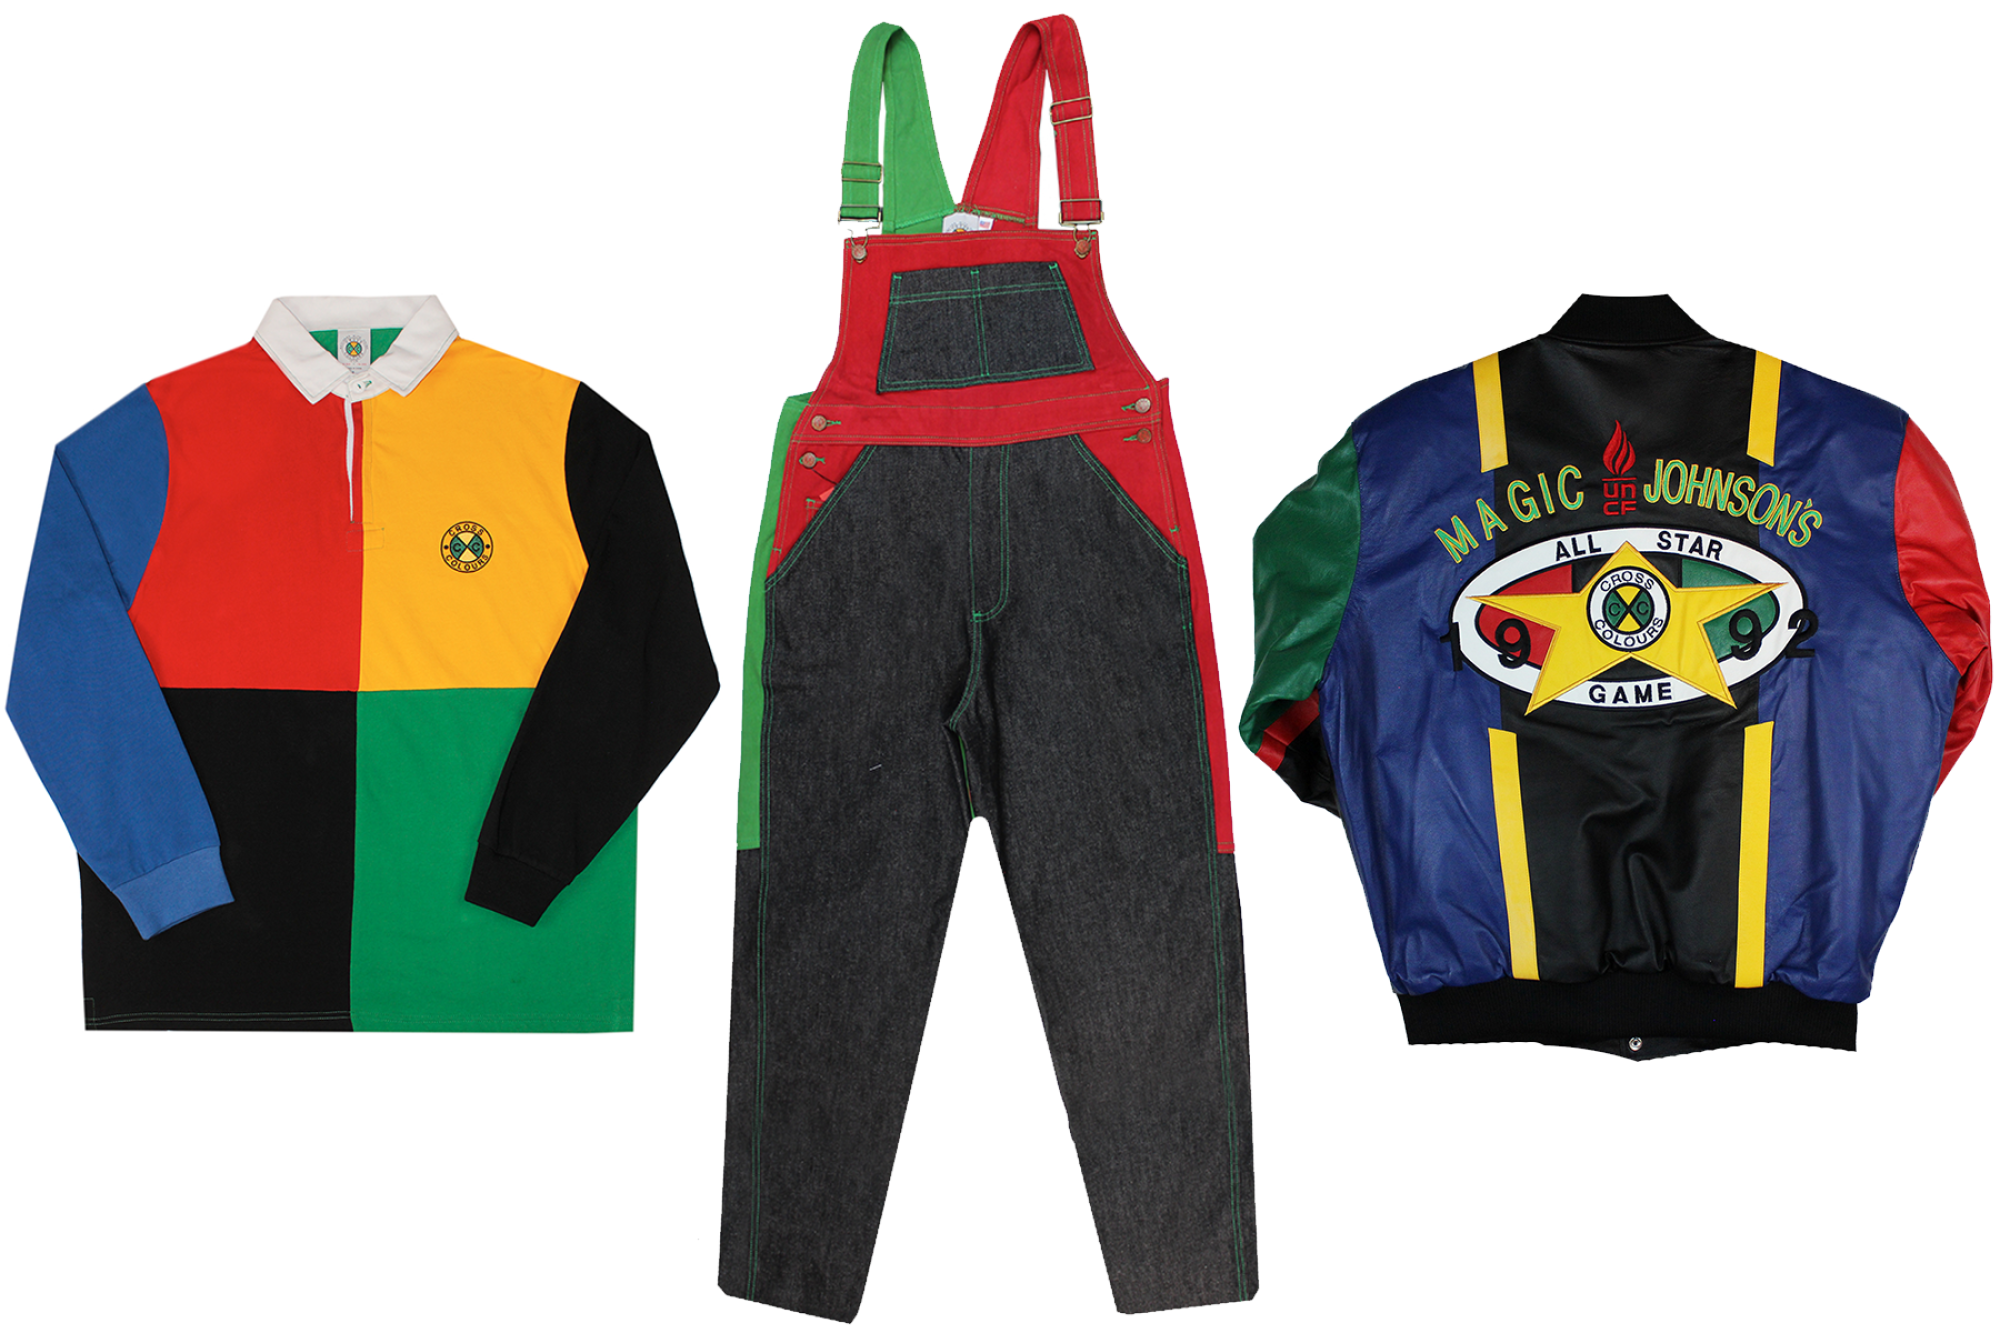 Cross Colours collaboration with Sony Pictures Consumer Products in honor of "Boyz N The Hood."